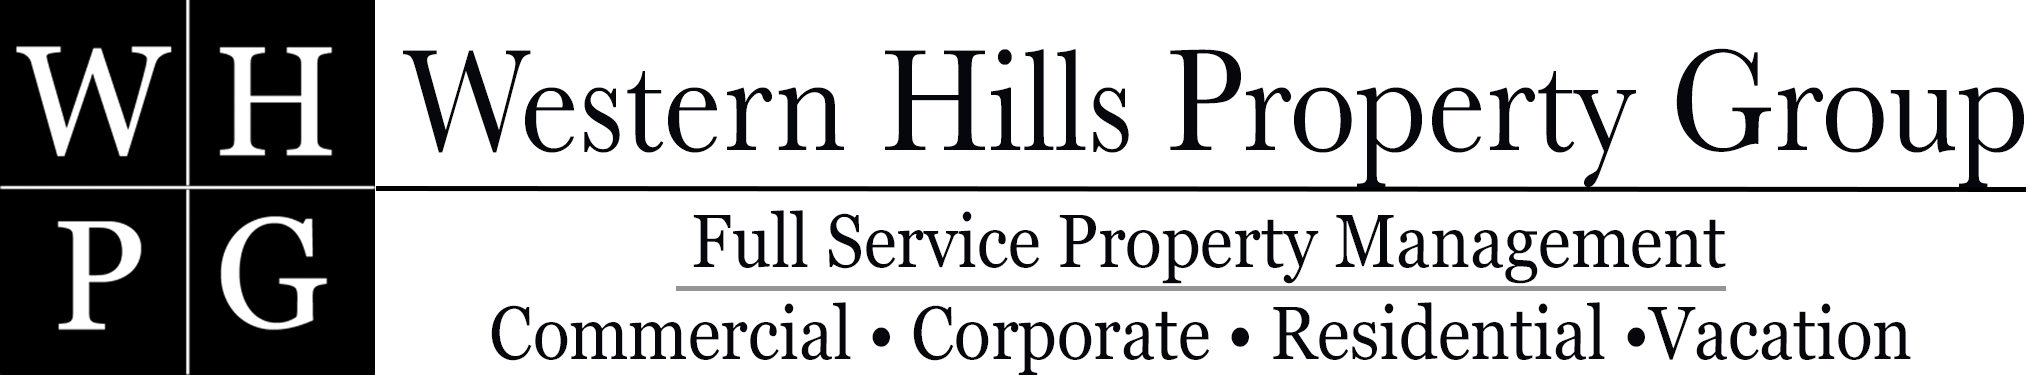 Western Hills Property Group